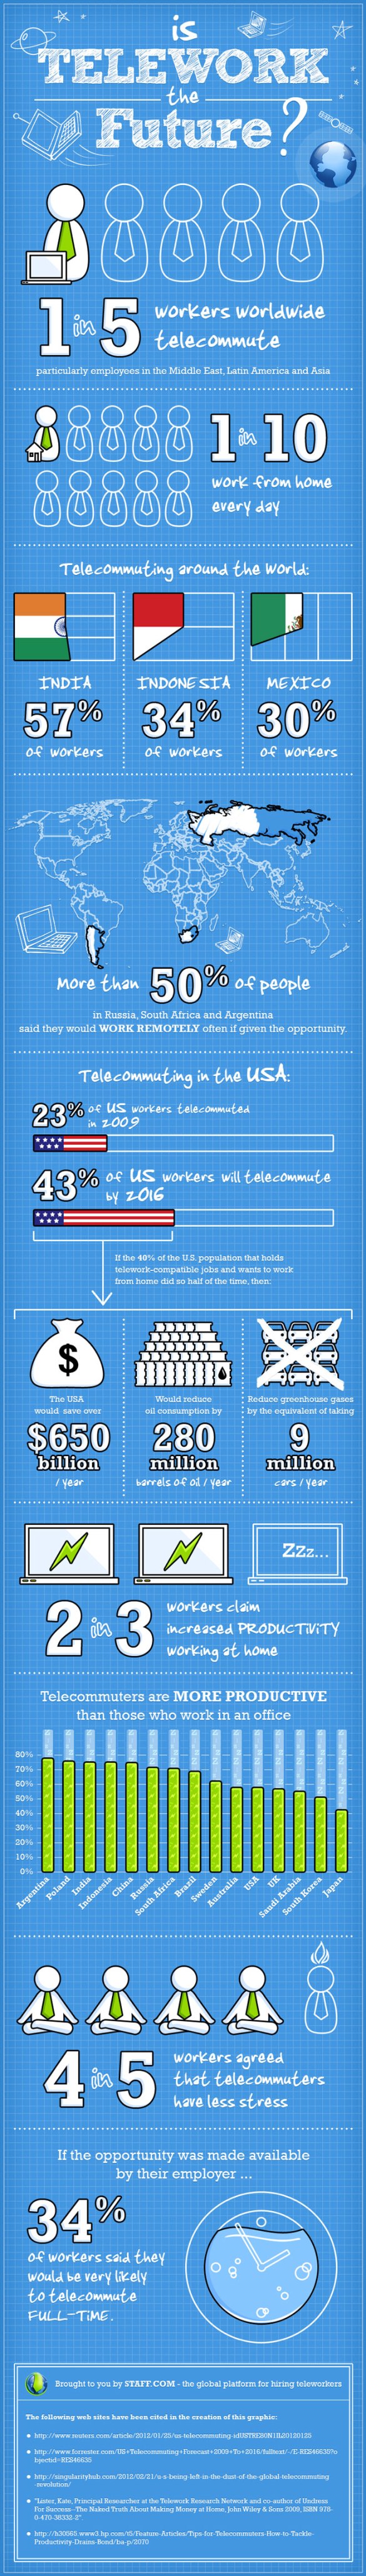 Is-Telework-the-Future-of-Work-Infographic